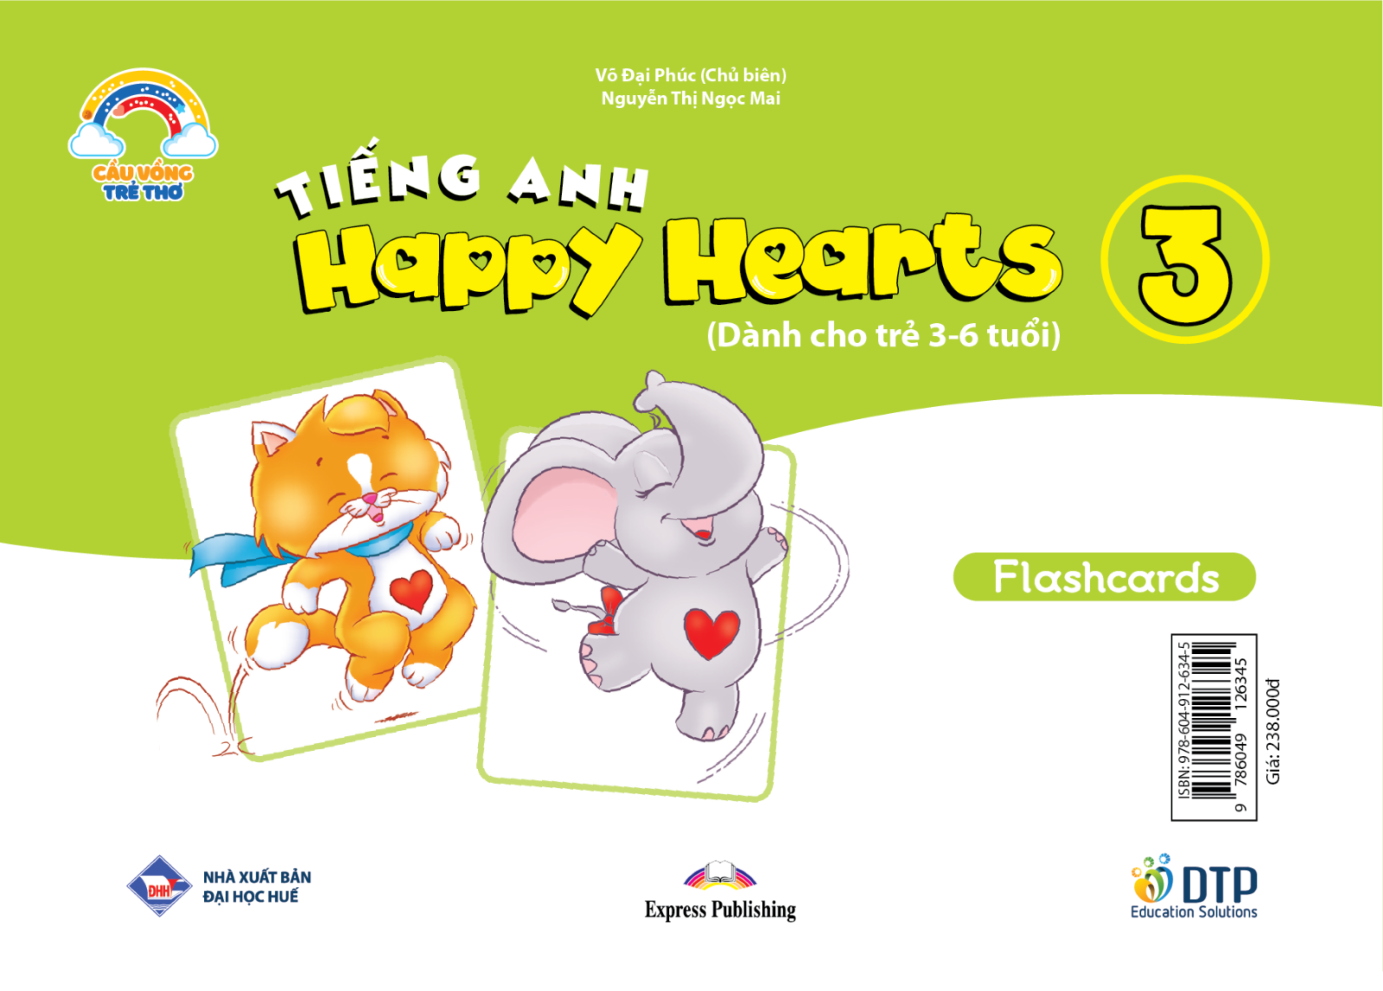 Tiếng Anh Happy Hearts 3 - Flashcards